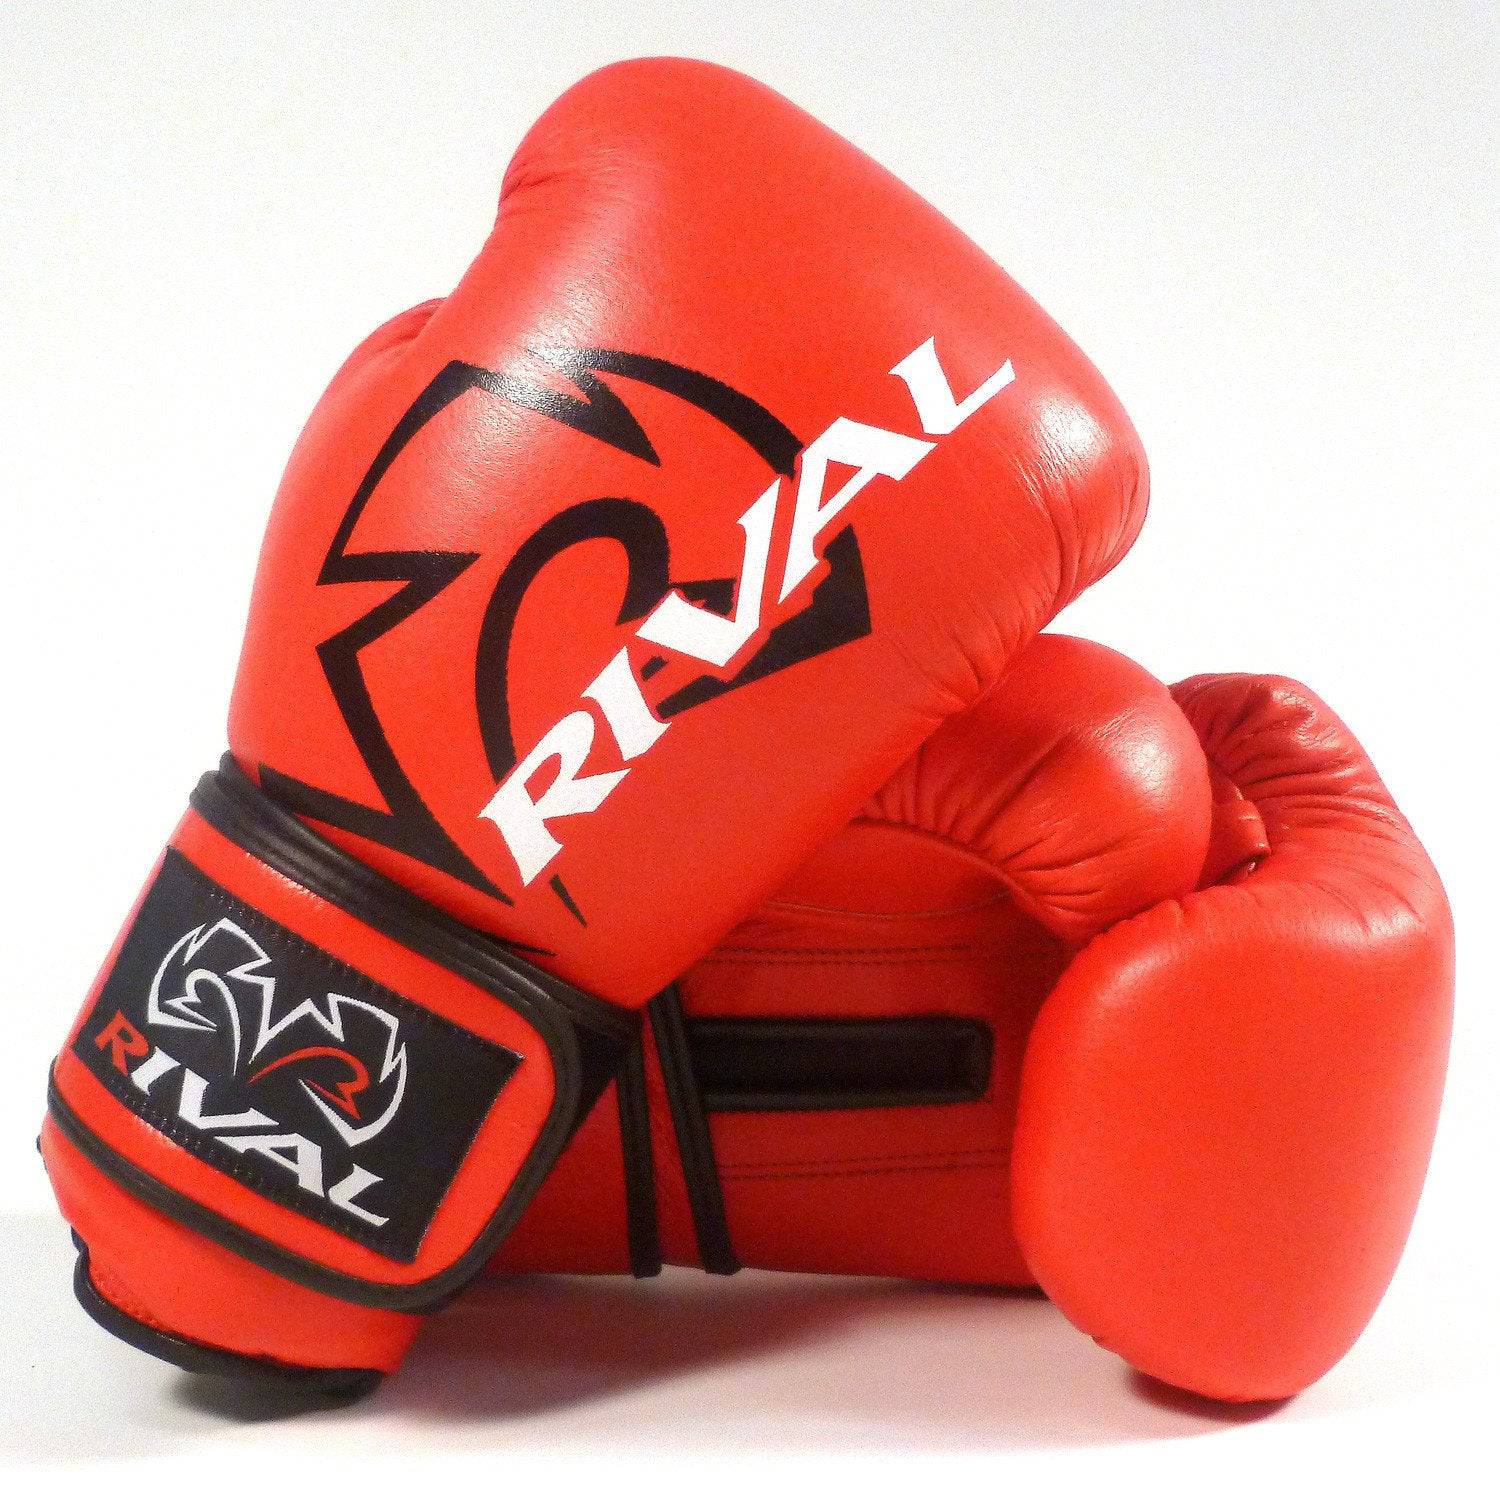 Rival | Sparring Gloves - RS4 Aero - XTC Fitness - Exercise Equipment Superstore - Canada - Sparring Gloves